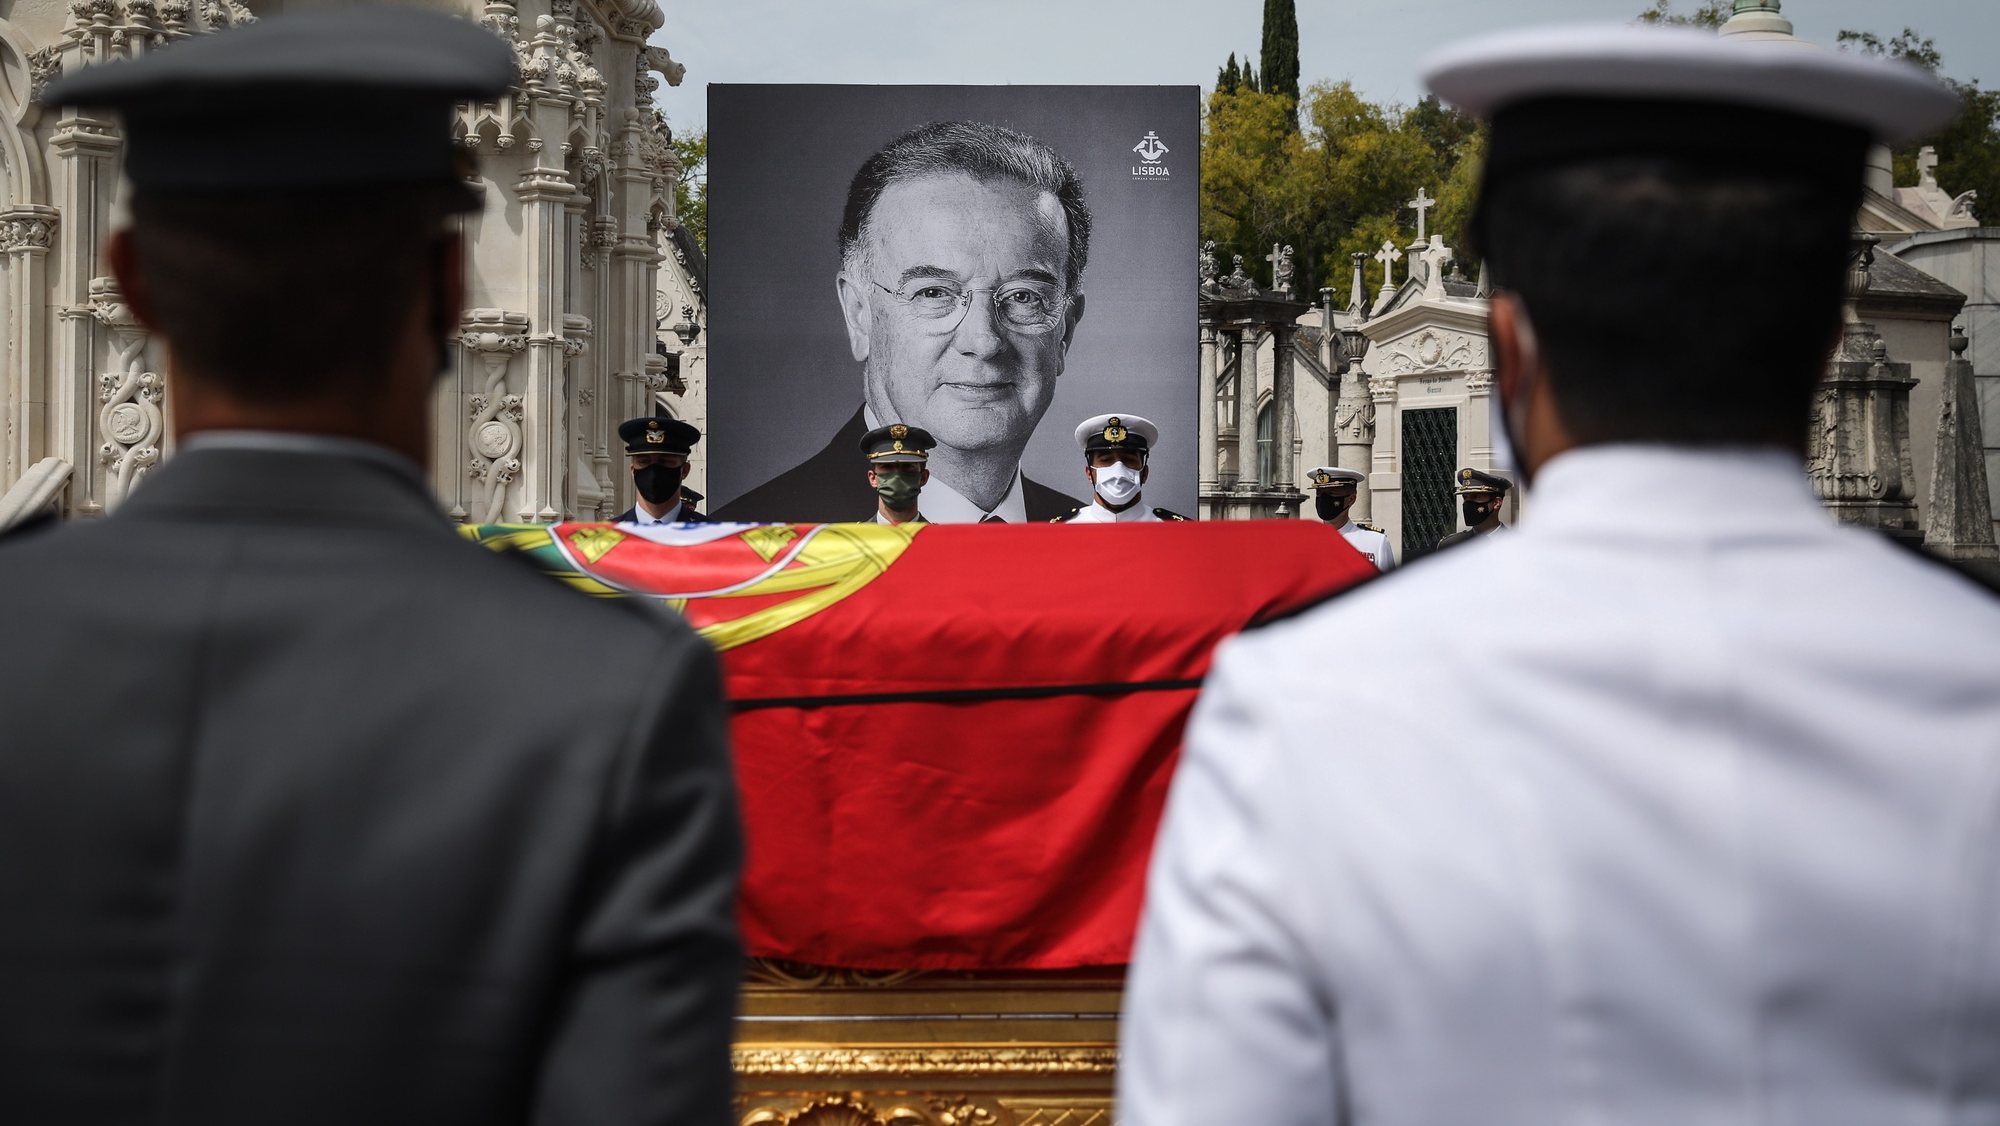 epa09463467 The urn during the funeral service for the late Portuguese President, Jorge Sampaio, at Alto de Sao Joao cemetery in Lisbon, Portugal, 12 September 2021. Jorge Sampaio, former secretary-general of the Socialist Party &#039;PS&#039; (1989/1992) and two-term President of the Republic (1996/2006), died on 10 September 2021, at the age of 81, at Santa Cruz Hospital, in Lisbon, where he had been hospitalized since 27 August, following respiratory difficulties.  EPA/RODRIGO ANTUNES